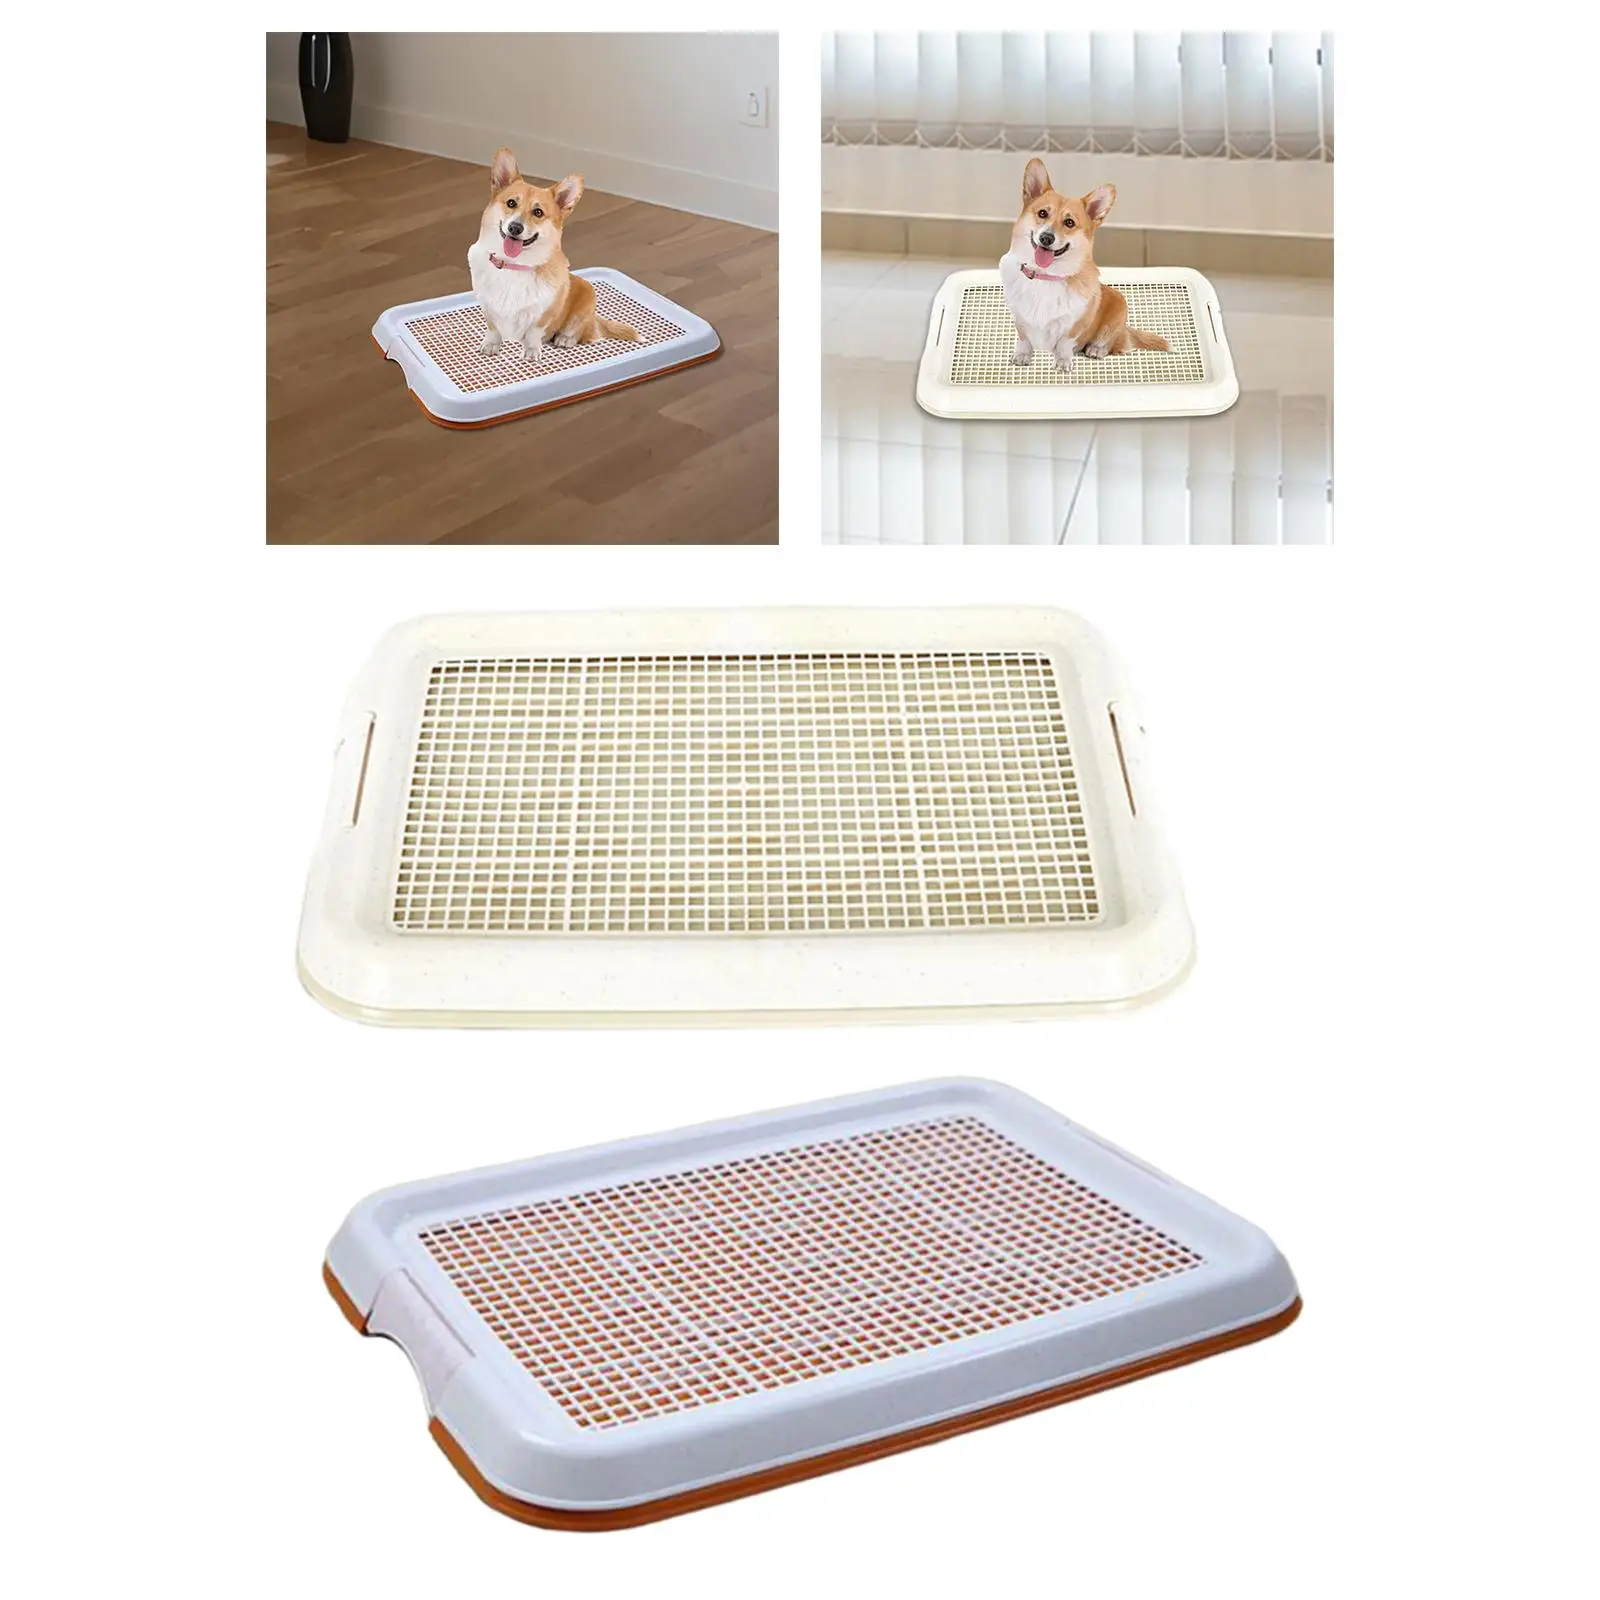 Dog Potty Toilet Training Tray Easy to Clean 18.5